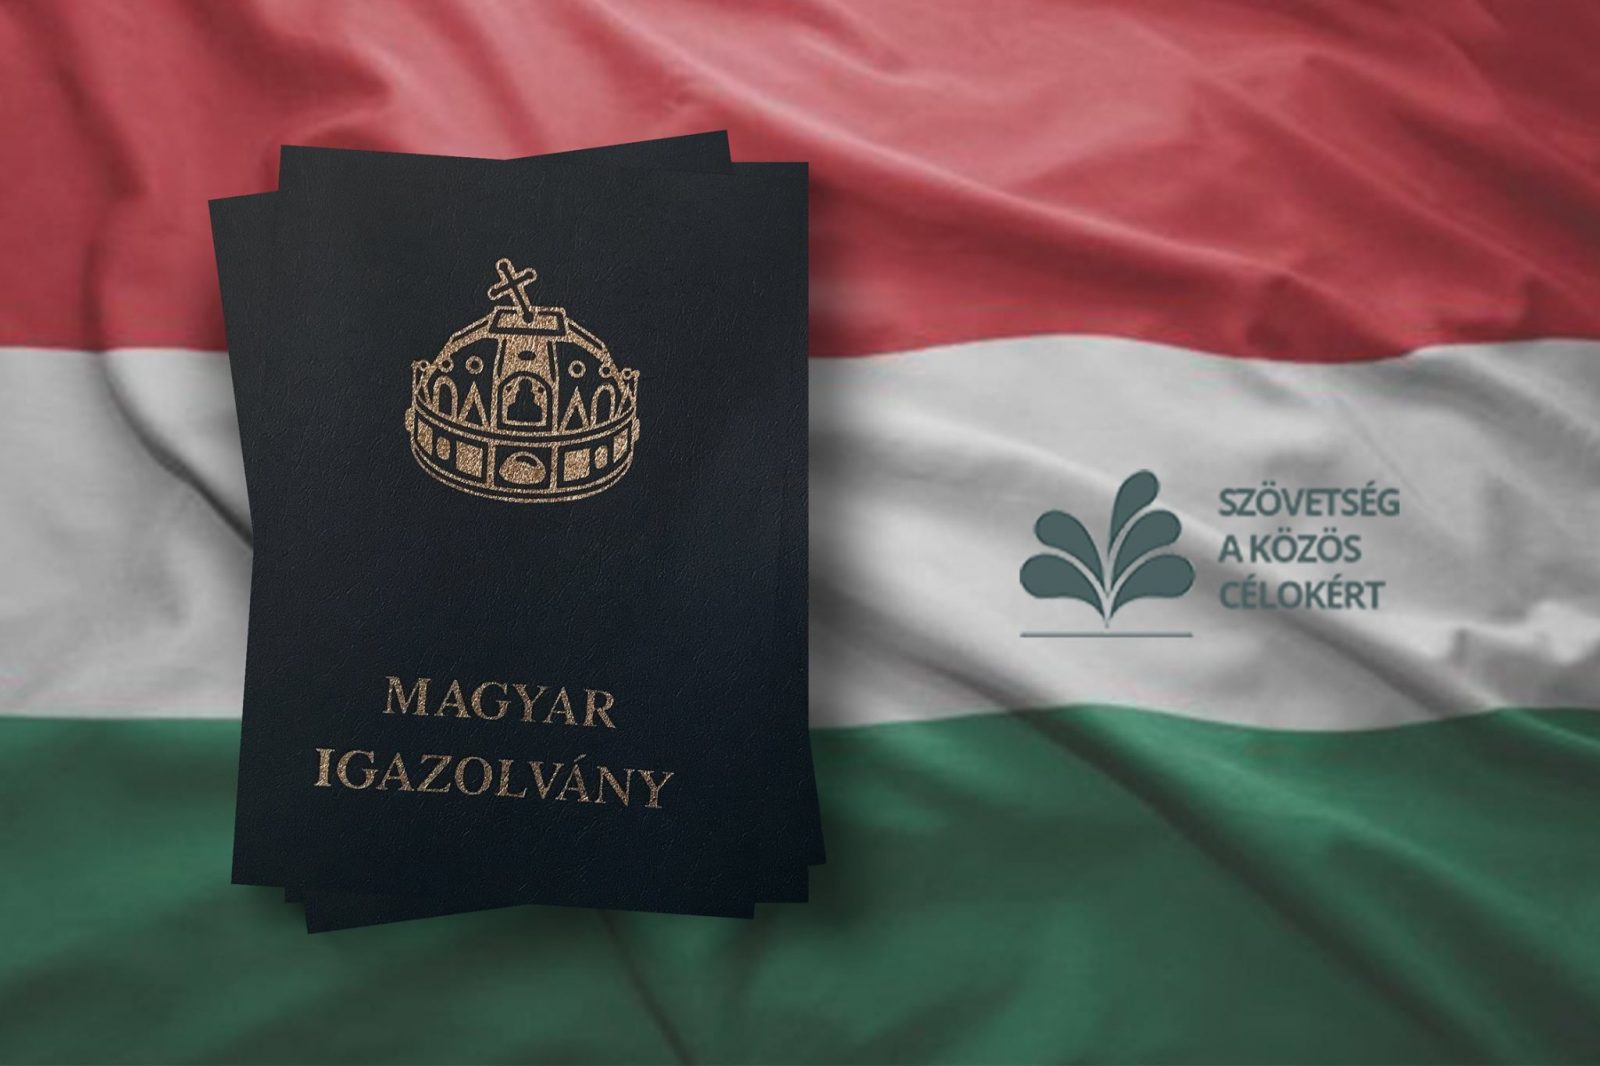 Semjen: The Hungarian ID card was the first public legal bond between Hungarians living abroad and the Hungarian state